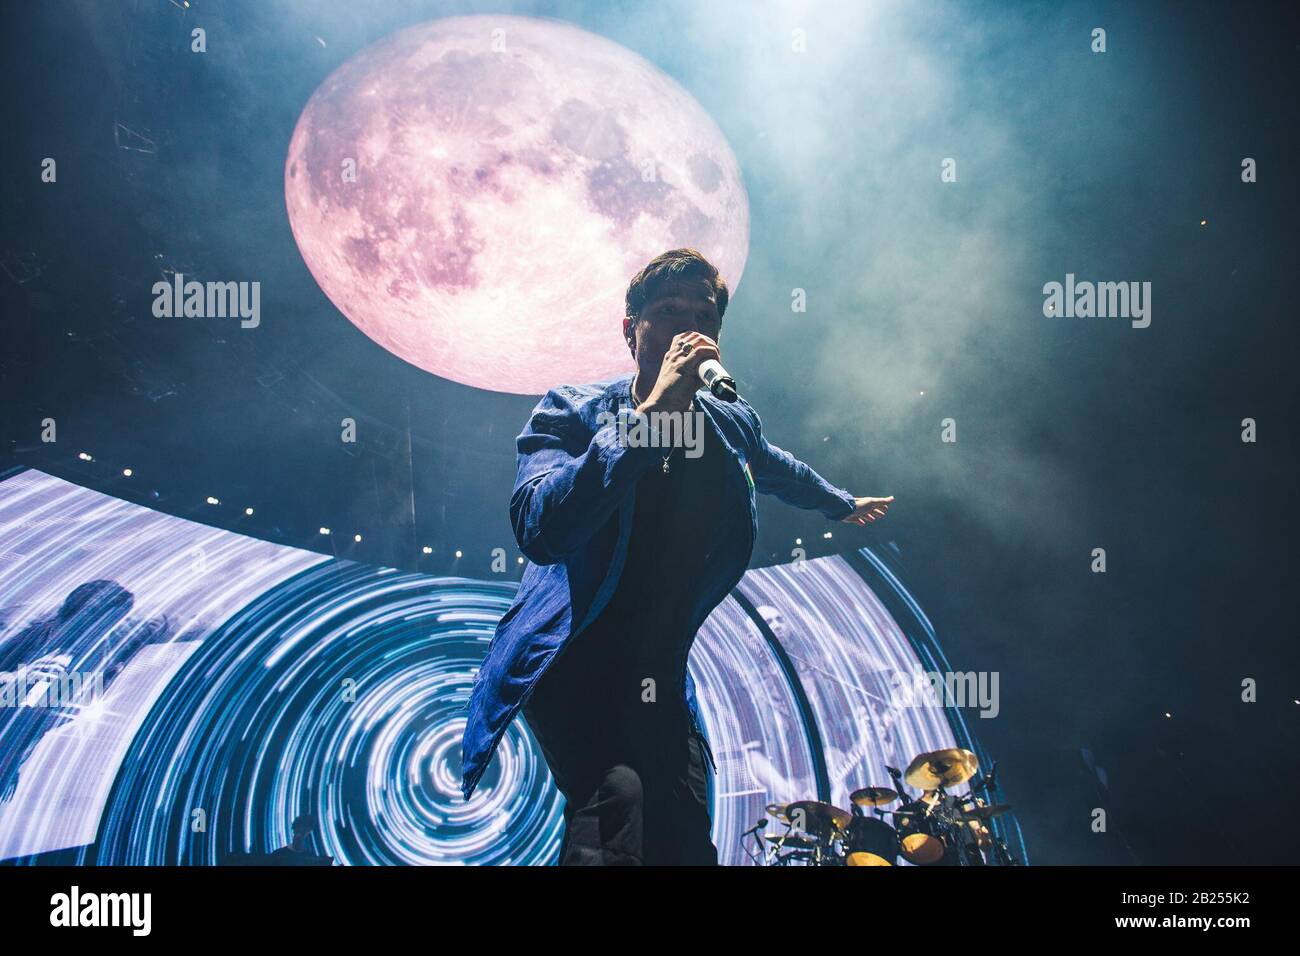 February 29, 2020: Daniel O'Donoghue, Mark Sheehan and Glen Power of the Irish band, The Script, perform a sold out show at the O2 Arena in London, promoting their new album Sunsets and Full Moons, 2020 (Credit Image: © Myles Wright/ZUMA Wire) Stock Photo